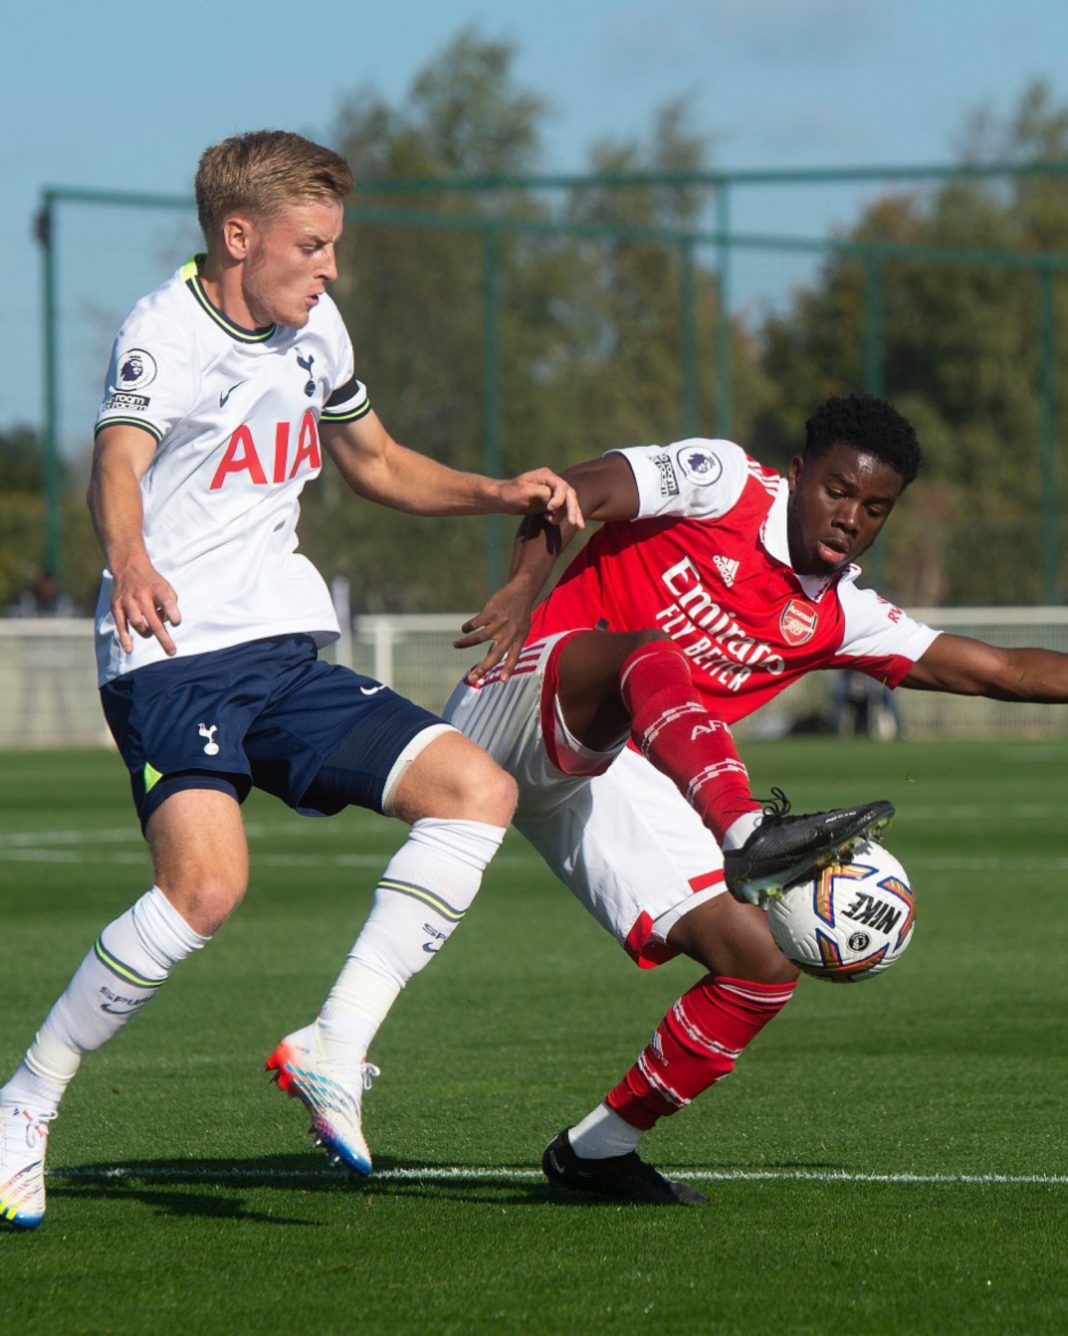 Nathan Butler-Oyedeji protects the ball for Arsenal against Spurs (Photo via Arsenal Academy on Twitter)